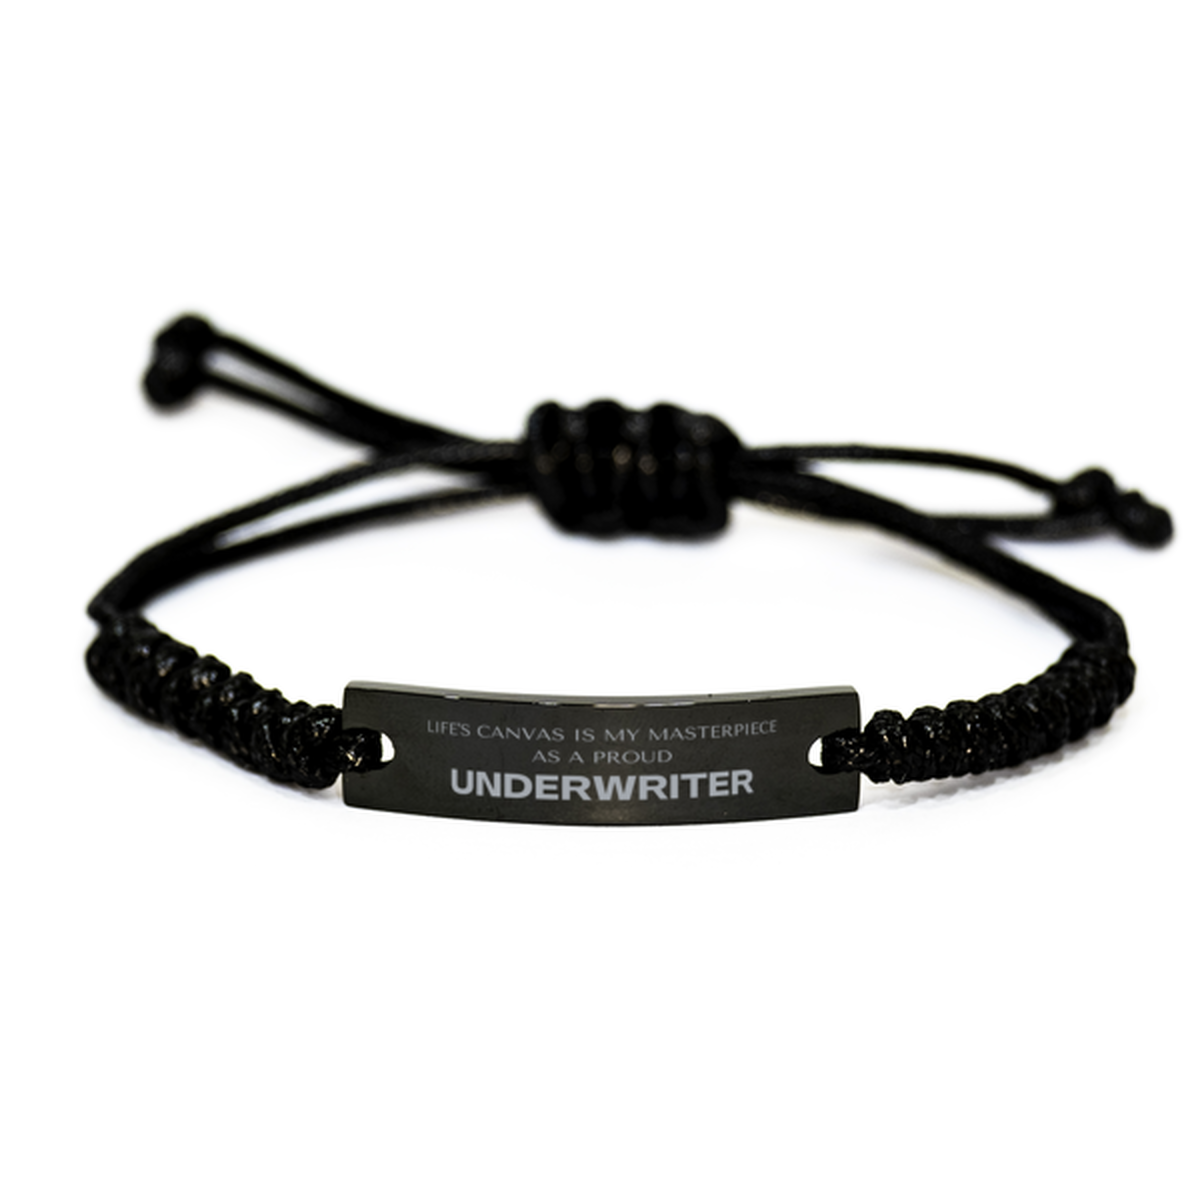 Proud Underwriter Gifts, Life's canvas is my masterpiece, Epic Birthday Christmas Unique Black Rope Bracelet For Underwriter, Coworkers, Men, Women, Friends